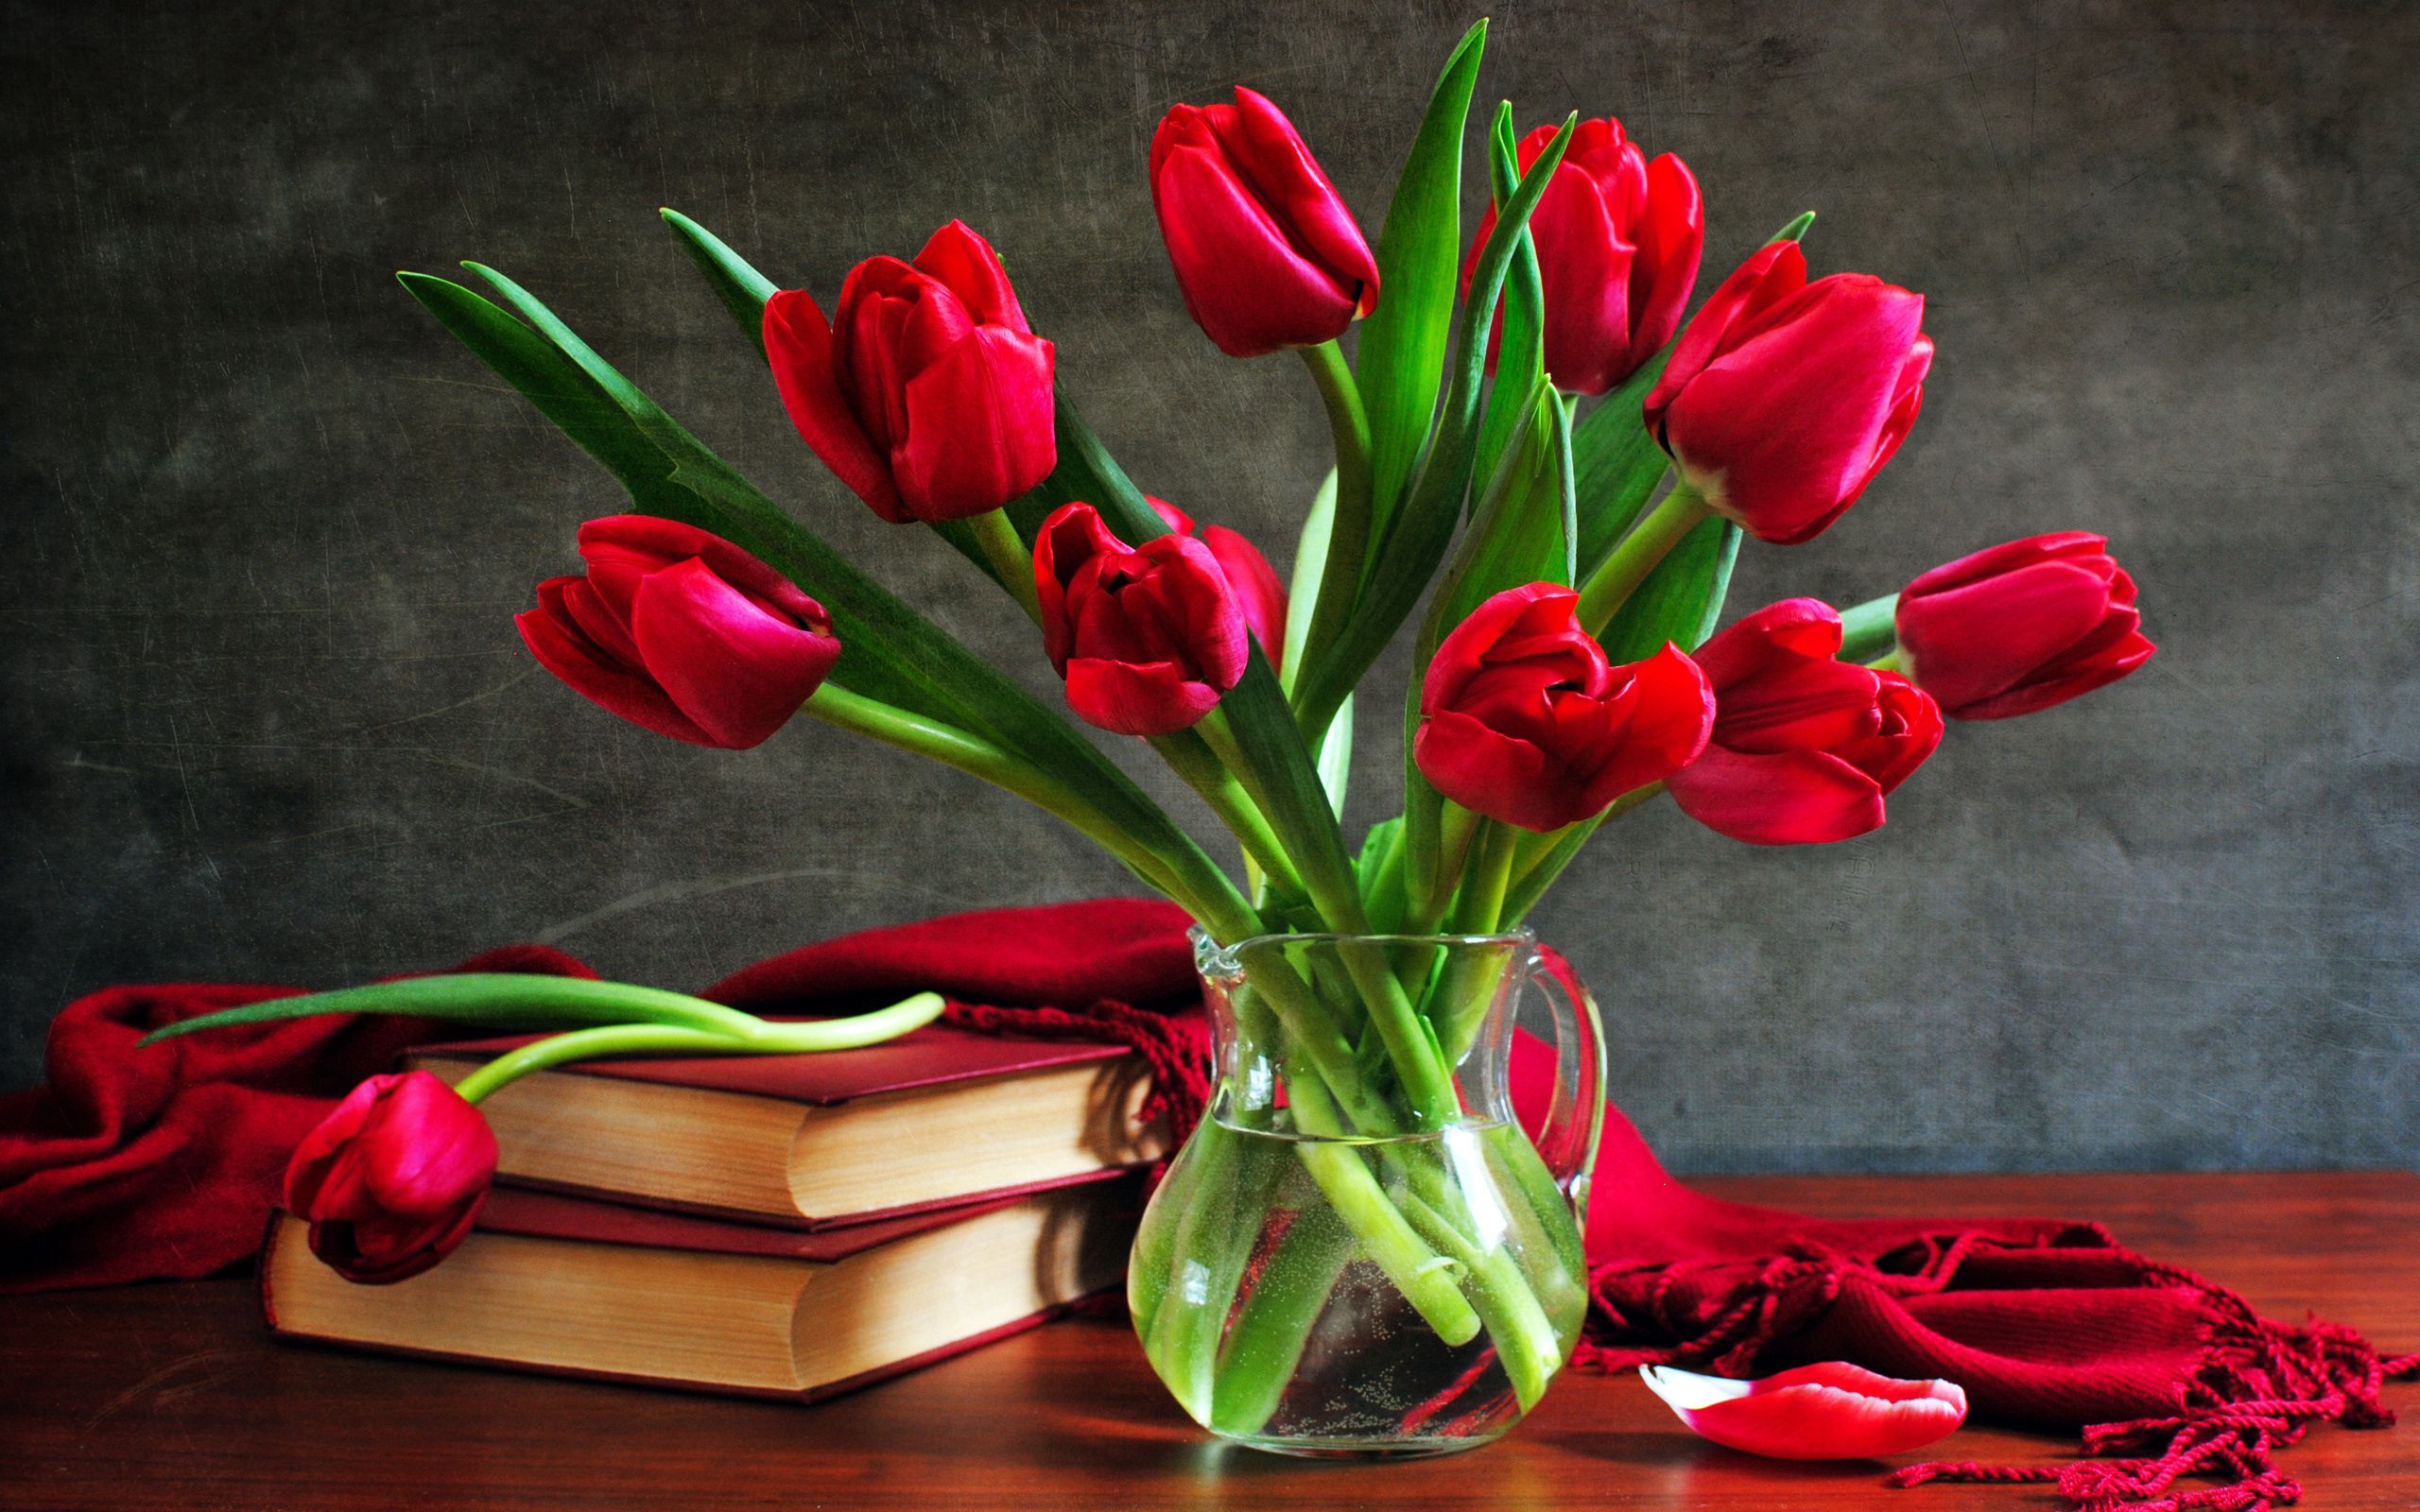 Phone Background Full HD flowers, tulips, cape, table